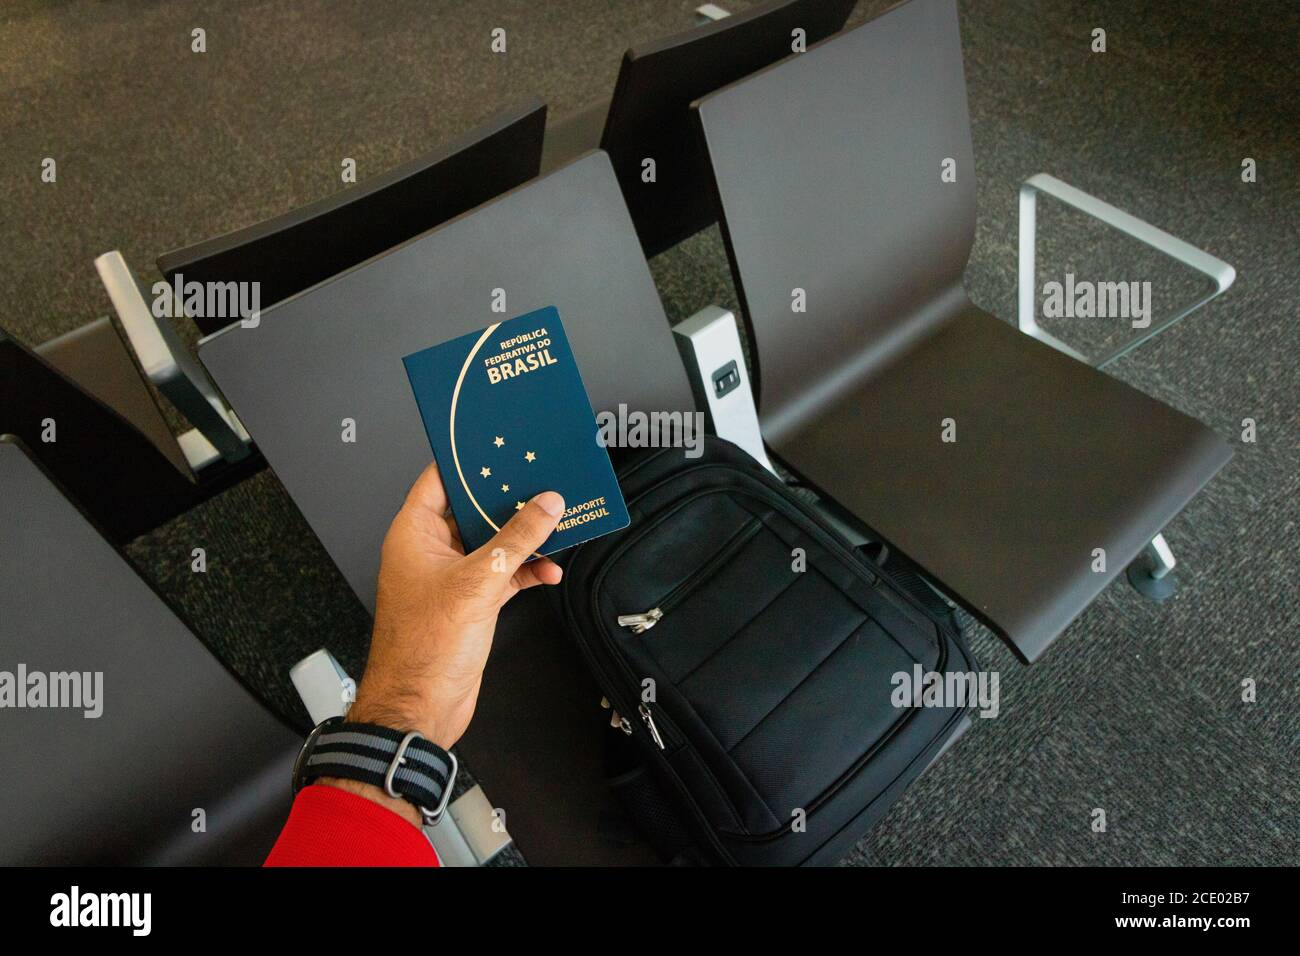 Travel concept image. Holding a brazilian passport, backpack on background. Stock Photo